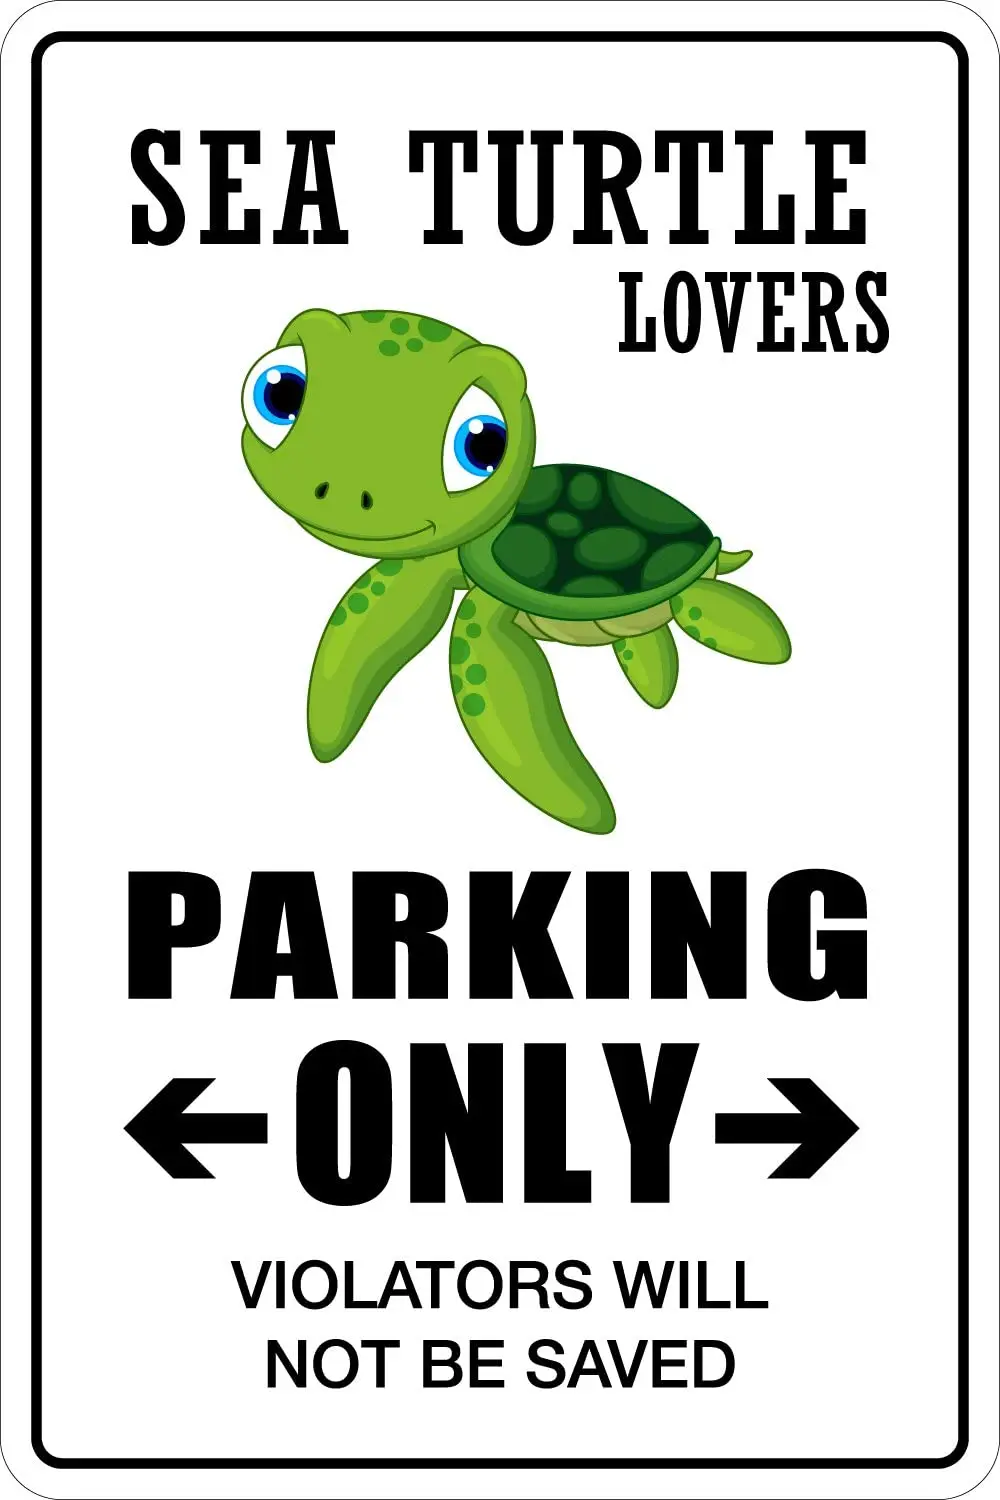 

Sea Turtle Lovers Parking Only Vintage Metal Tin Signs Rustic Pin Up Poster Plaque Pub Wall Decor